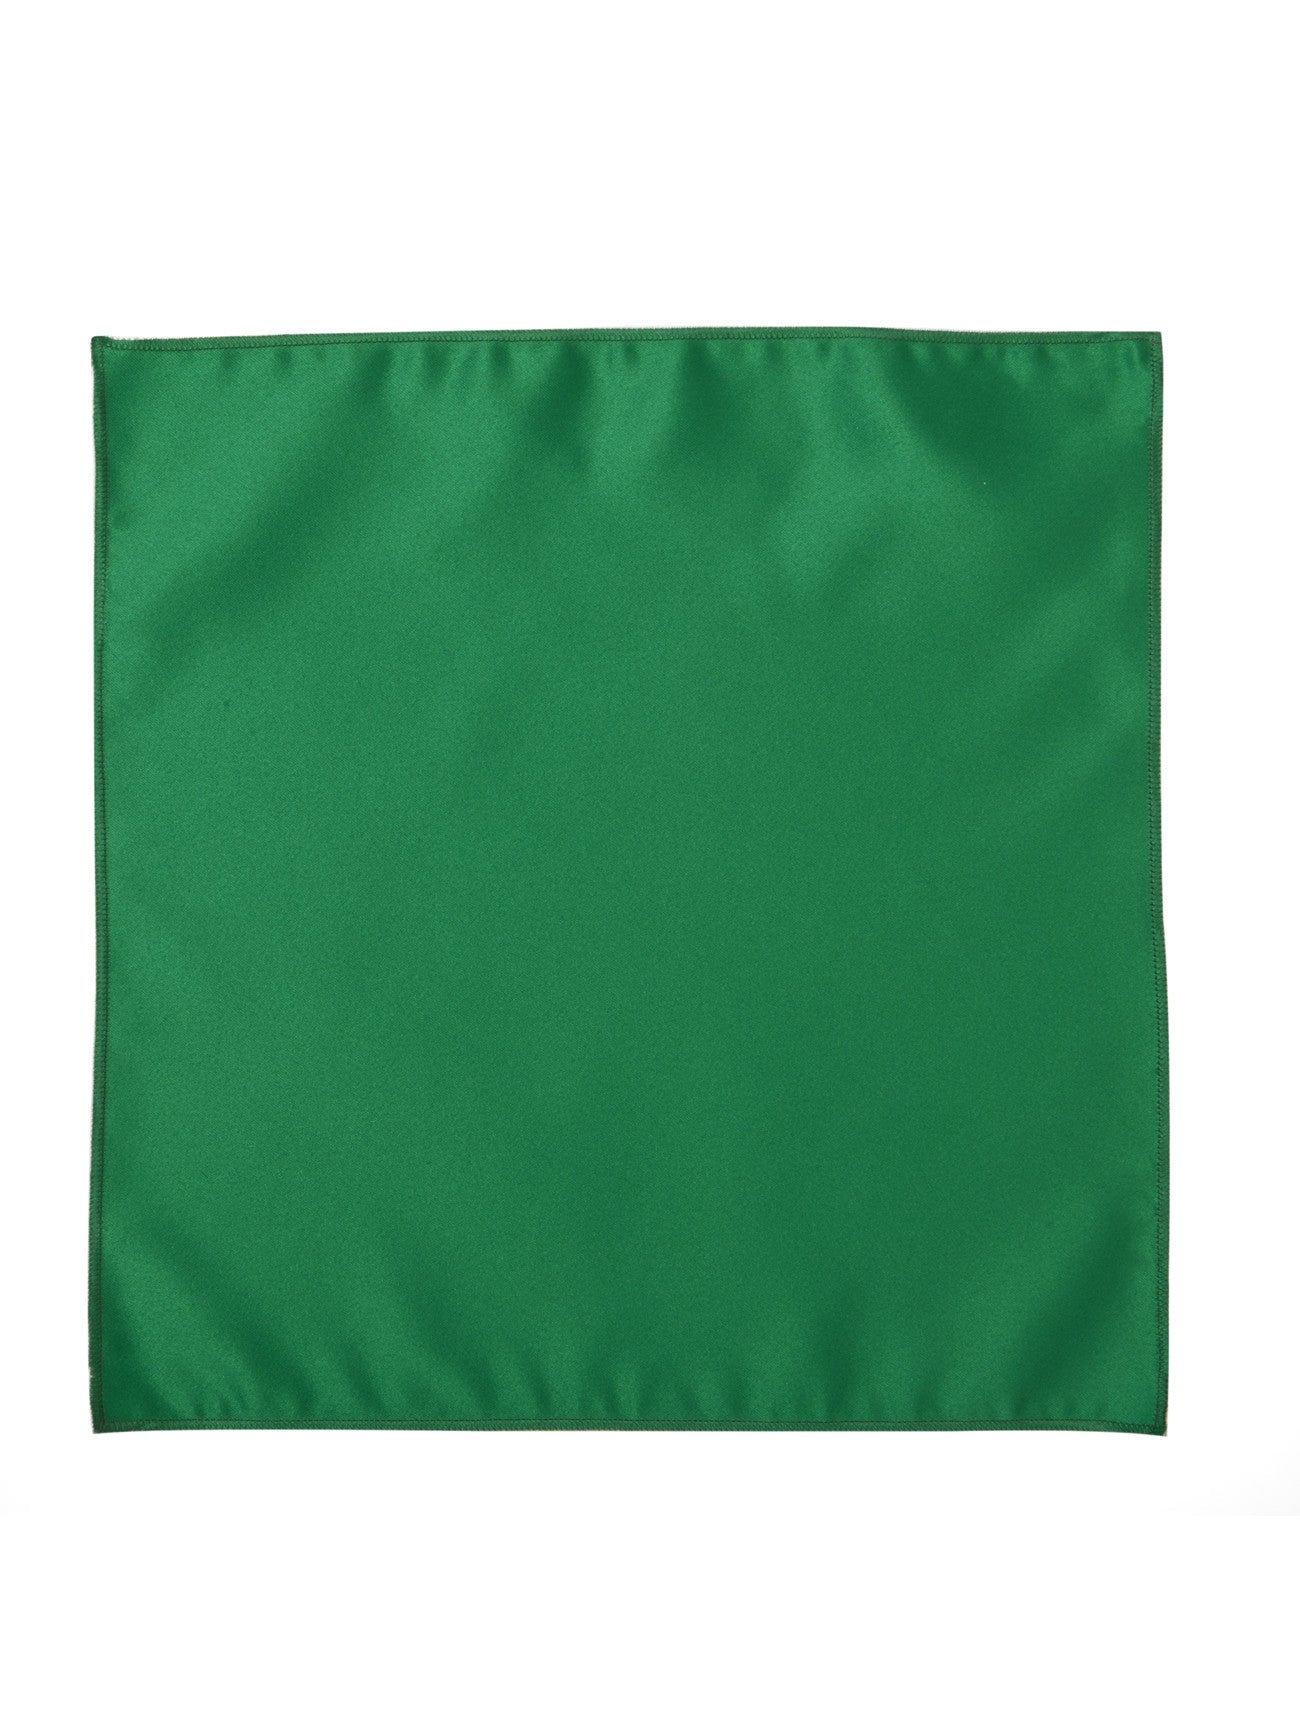 Deluxe Satin Formal Pocket Square (Kelly Green)